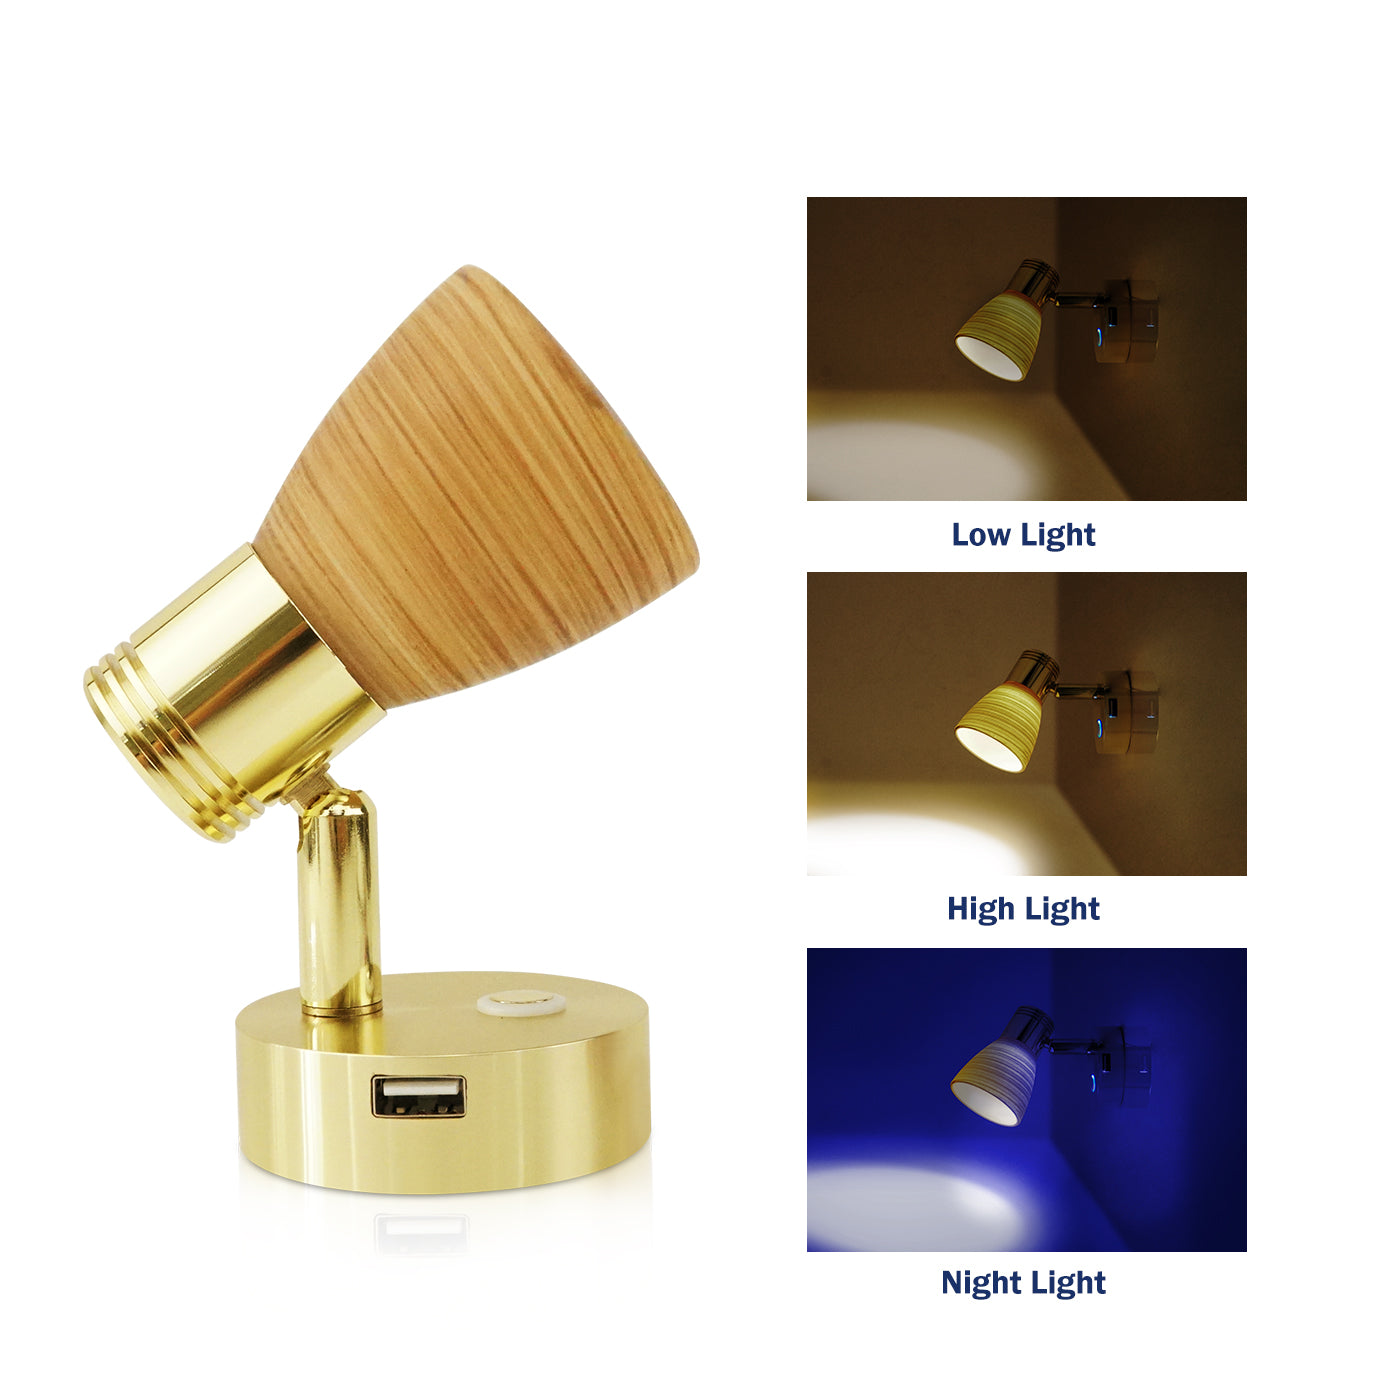 THALASSA 12V Reading Light Teak Color Glass Dimmer Touch Adjustable with/without USB Port - THALASSA